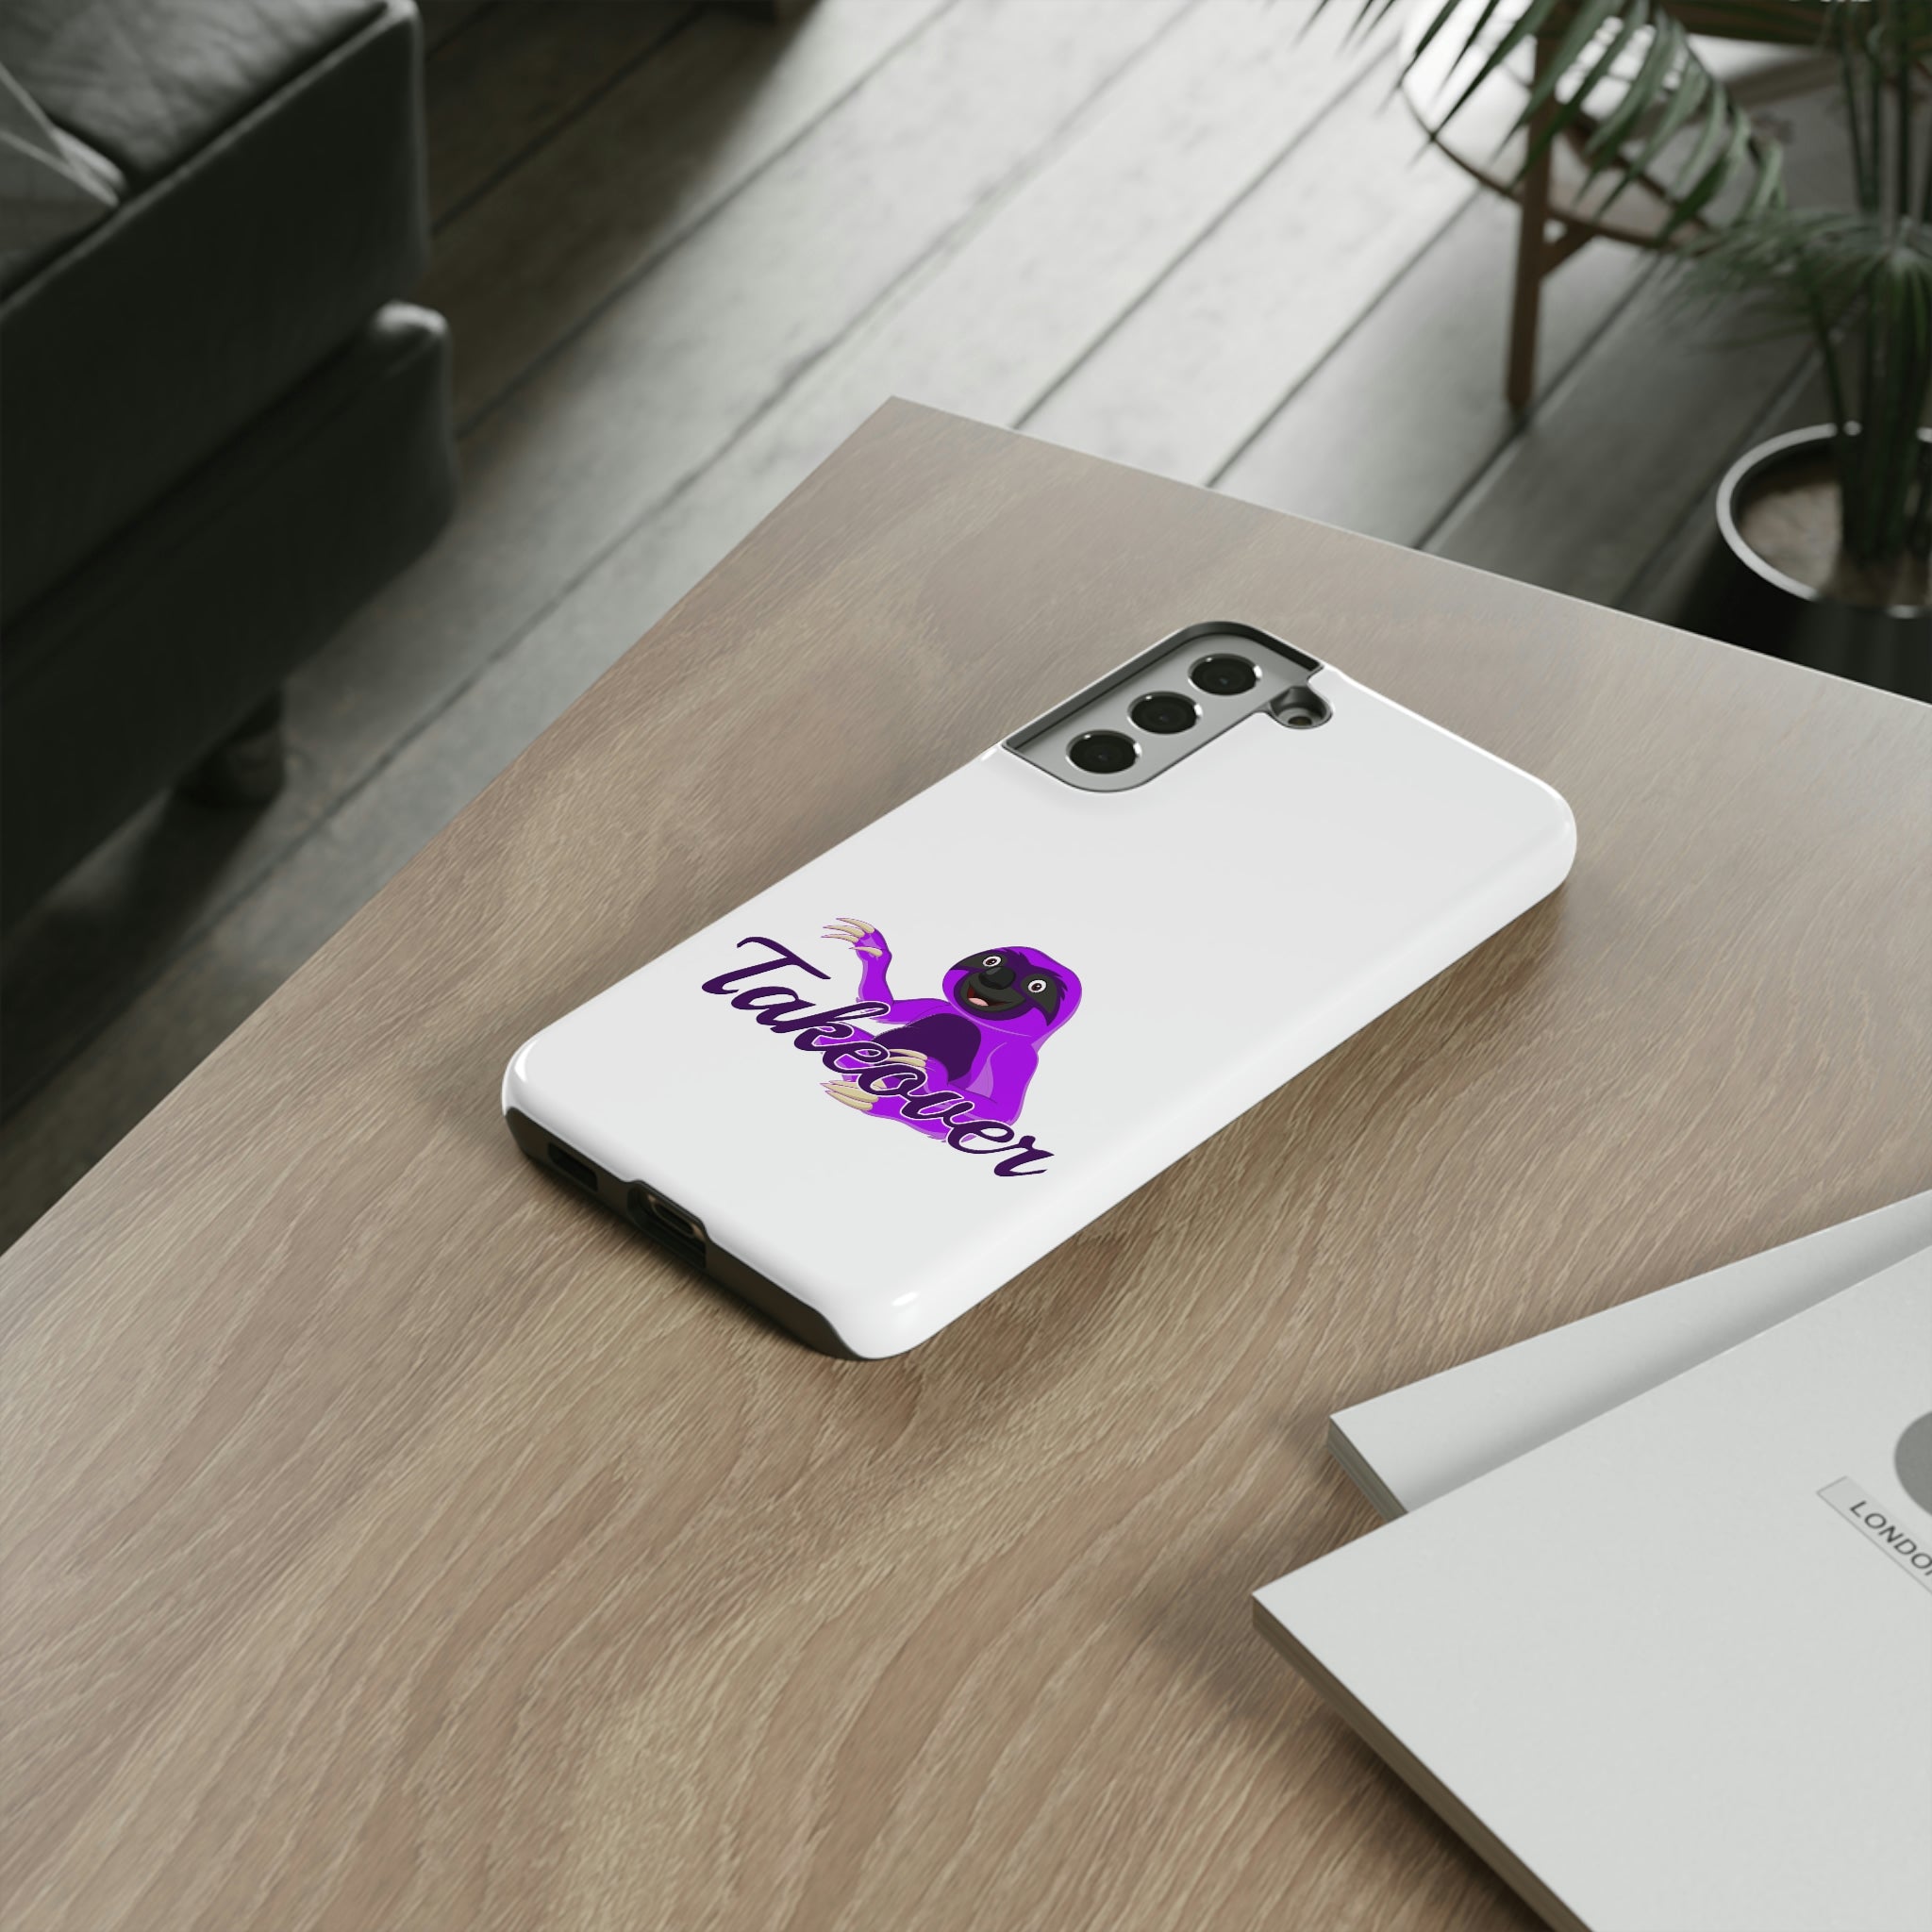 Sloth Takeover Phone Case